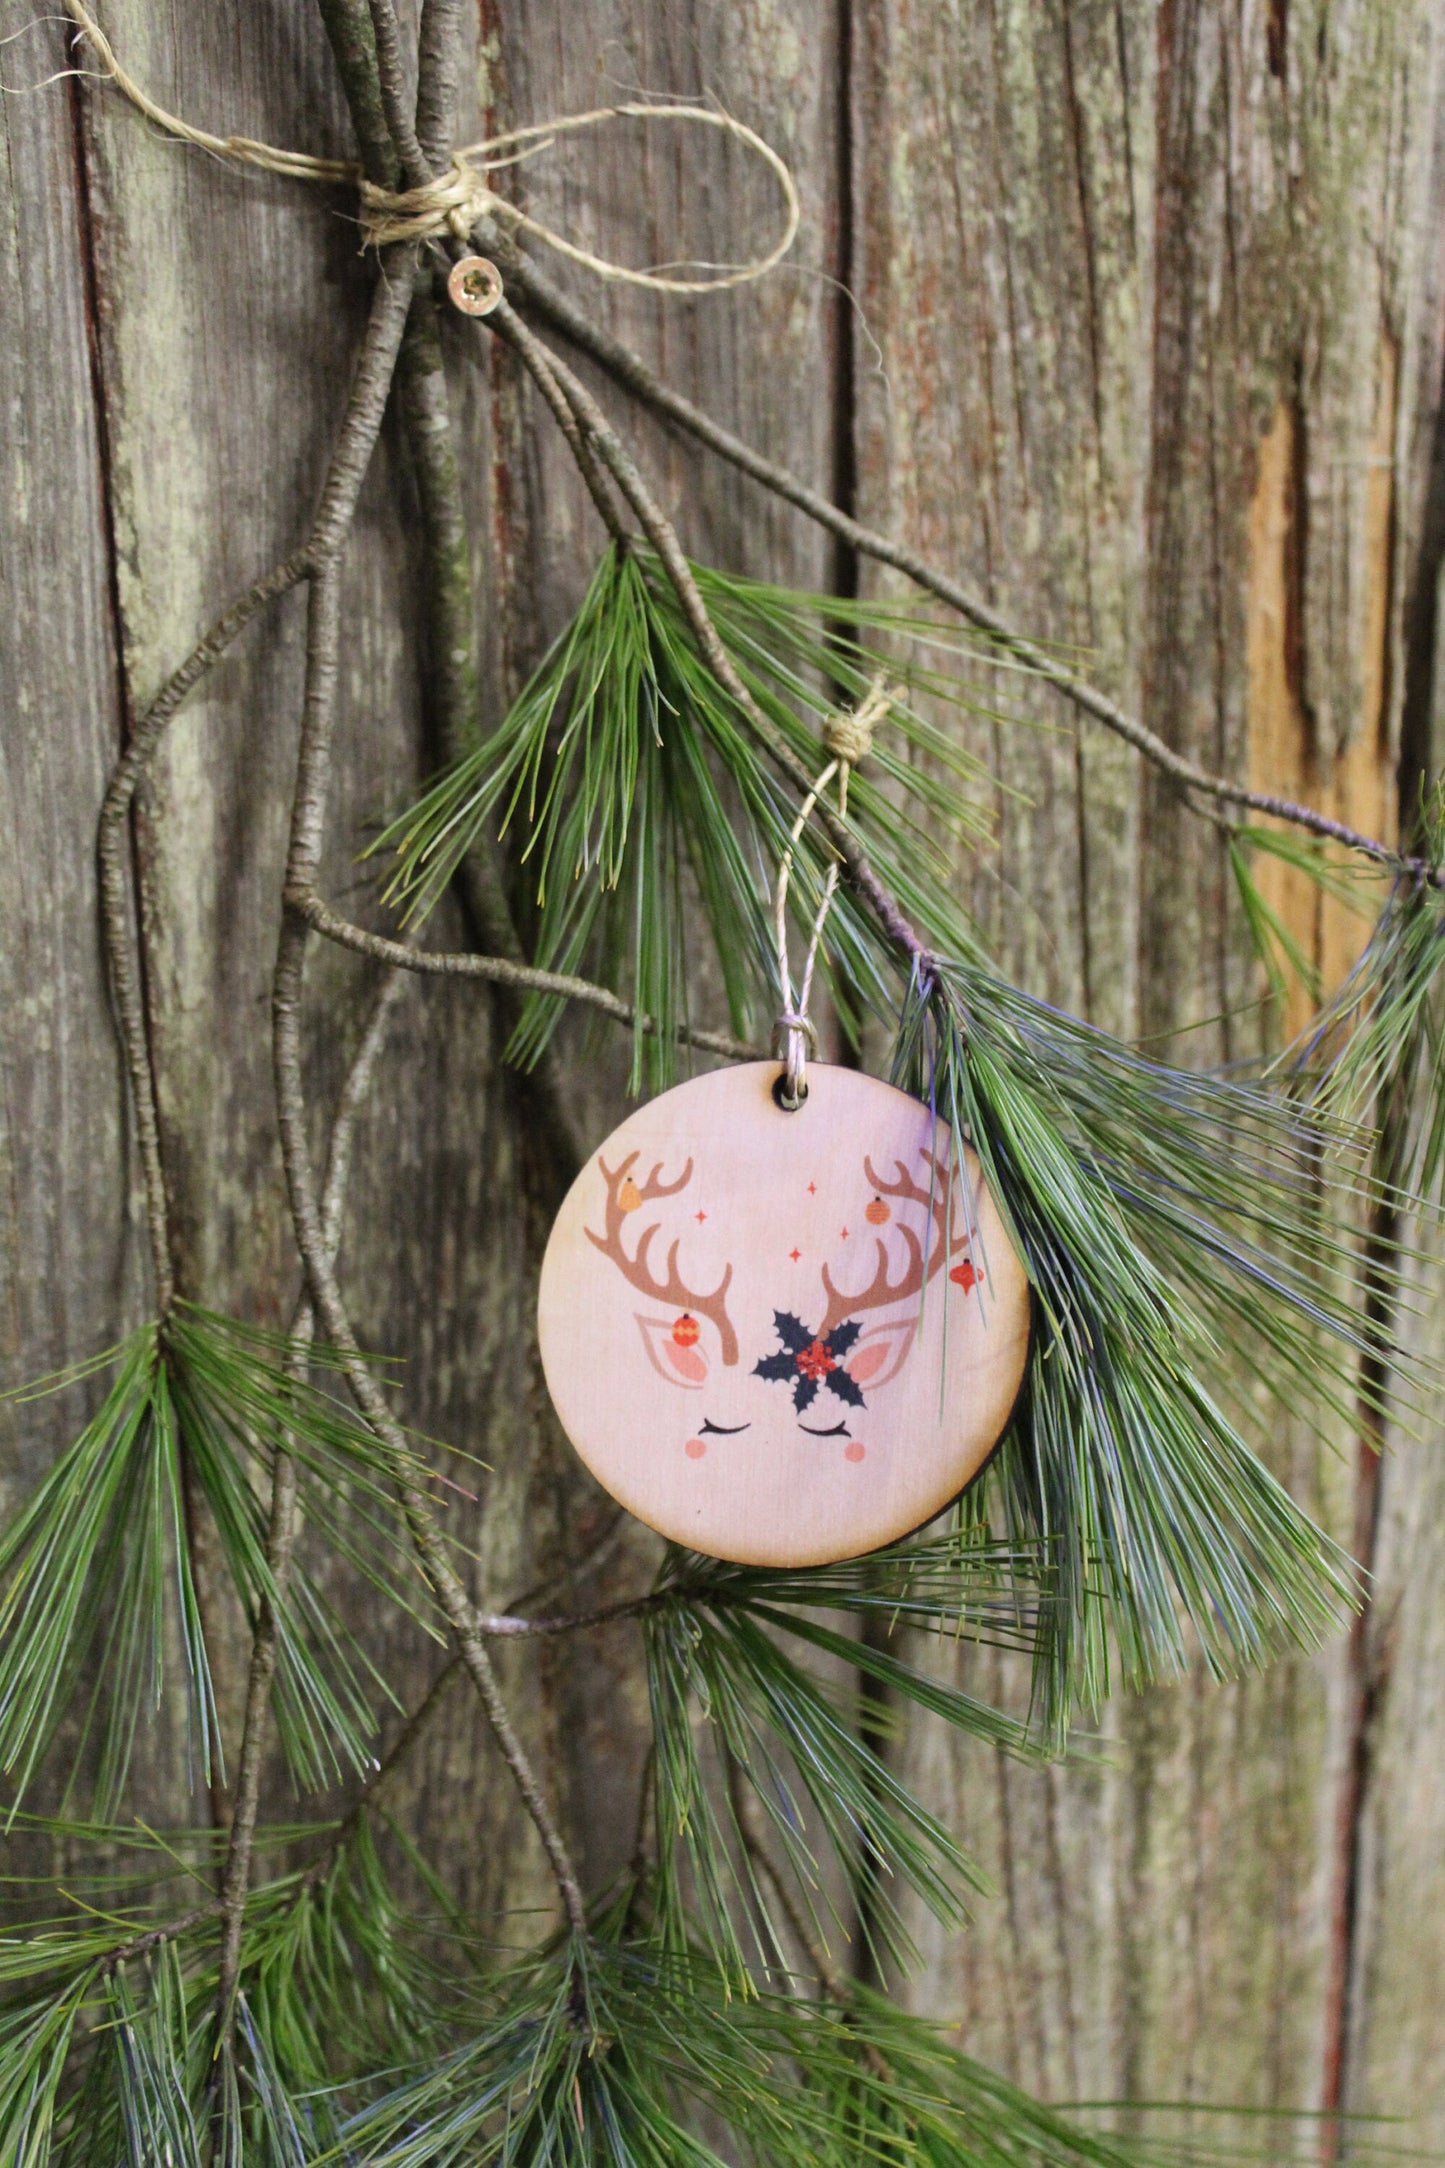 Set of 3 Unicorn Face Ornament Reindeer Antlers Wood Slice Poinsettia Horn Eyelashes Up-close Primitive Christmas Ornament Rustic Tree Print